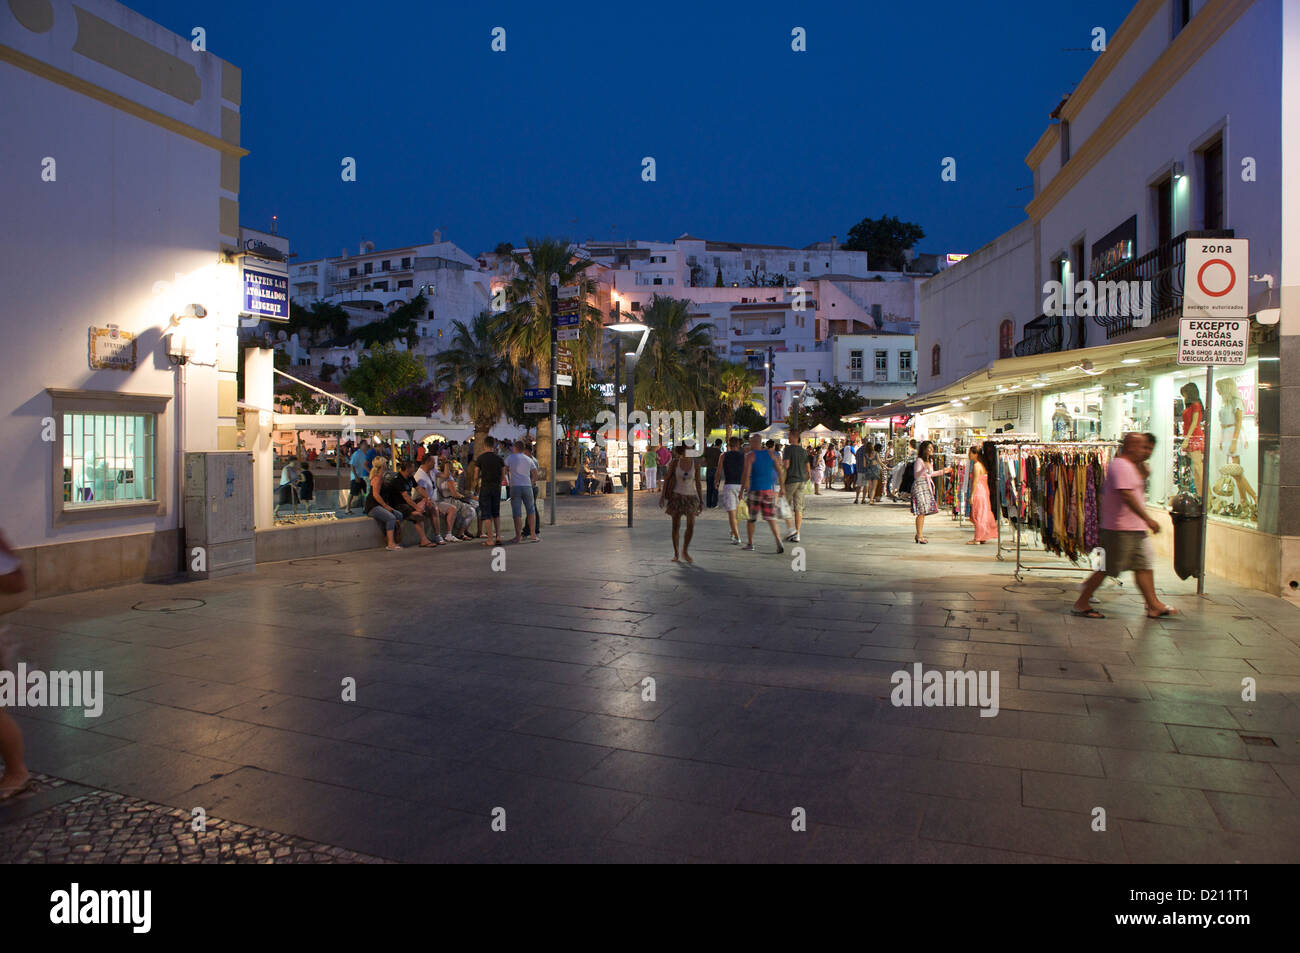 People in the street at downtown in the evening, Albufeira, Algarve, Portugal, Europe Stock Photo